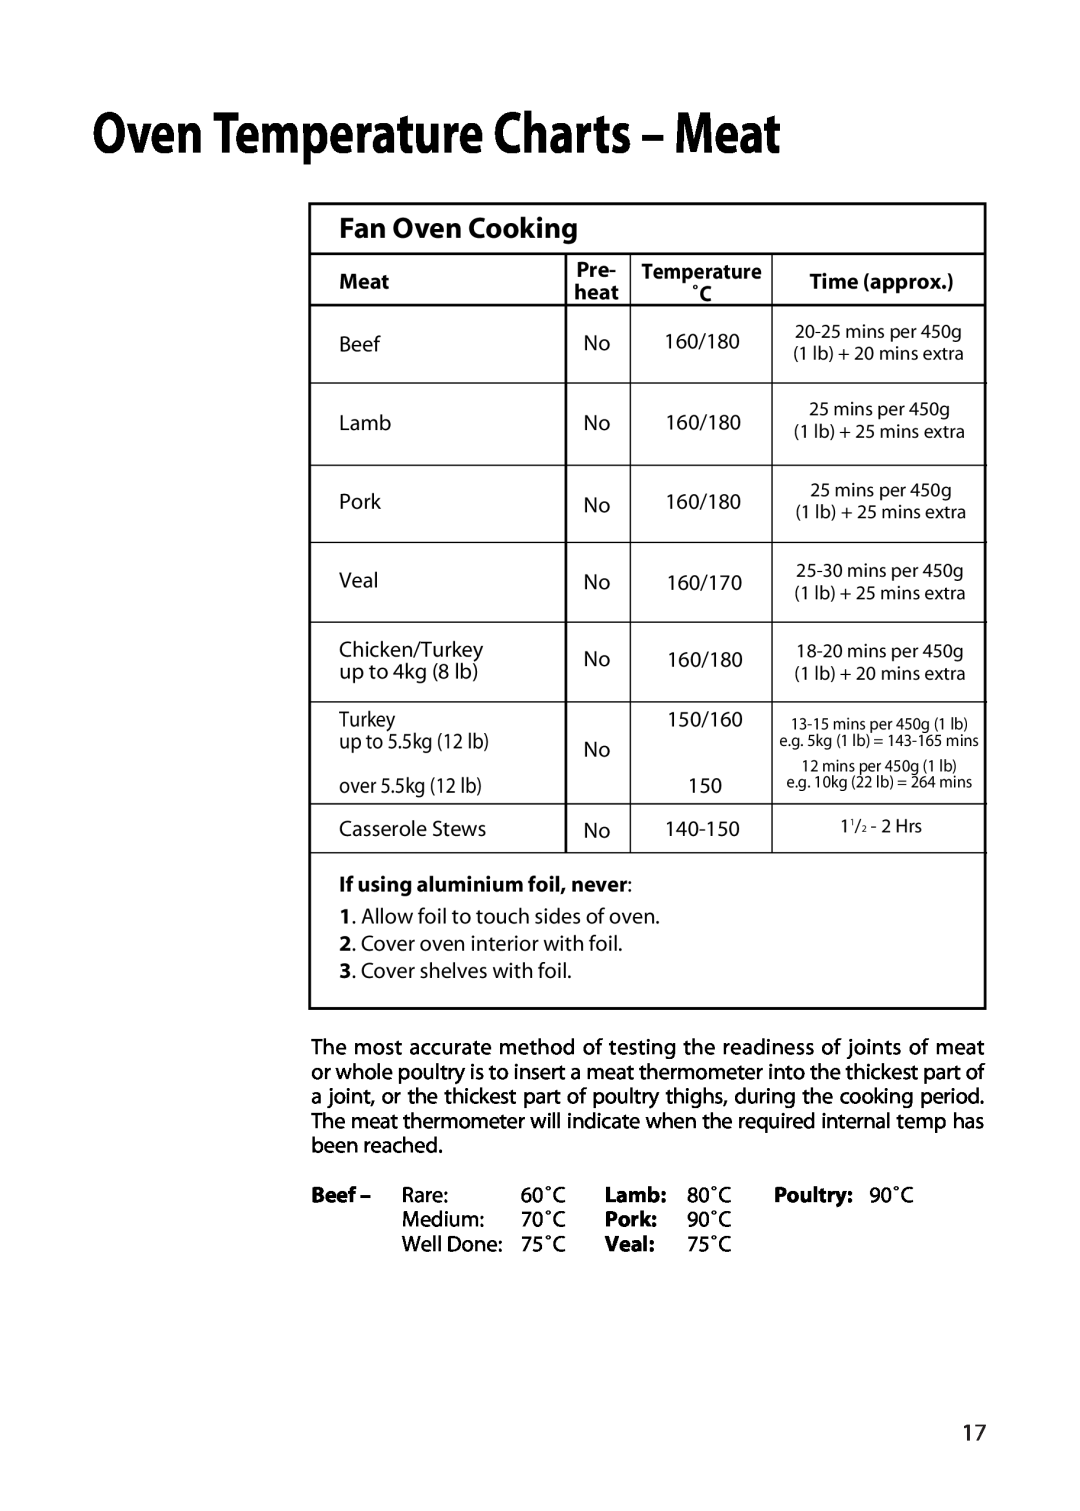 Hotpoint EW22 Oven Temperature Charts - Meat, Fan Oven Cooking, Time approx, If using aluminium foil, never, Beef - Rare 